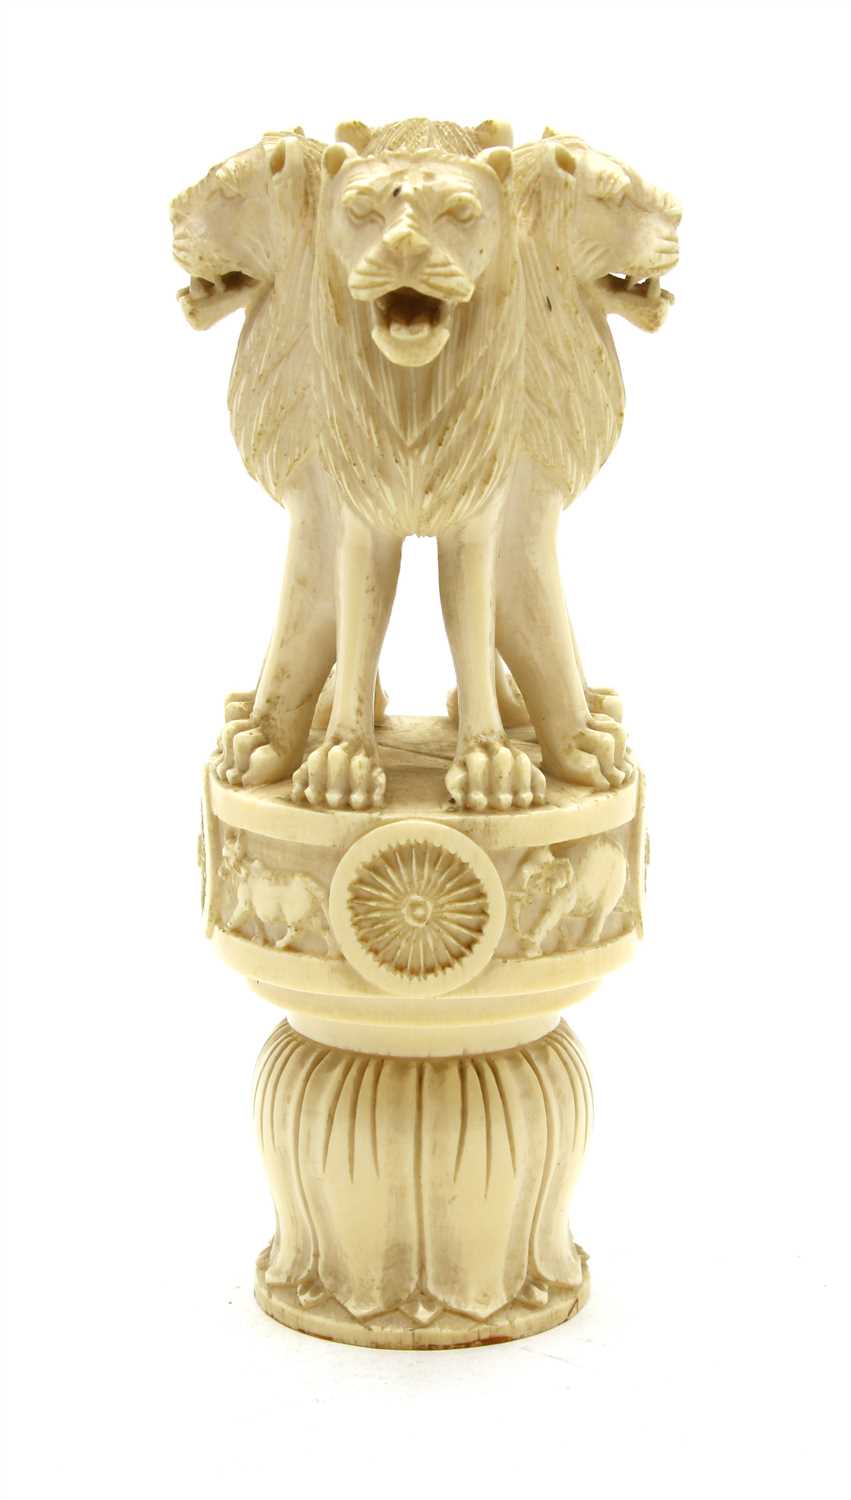 Lot 159 - A late 19th century Indian carved ivory finial